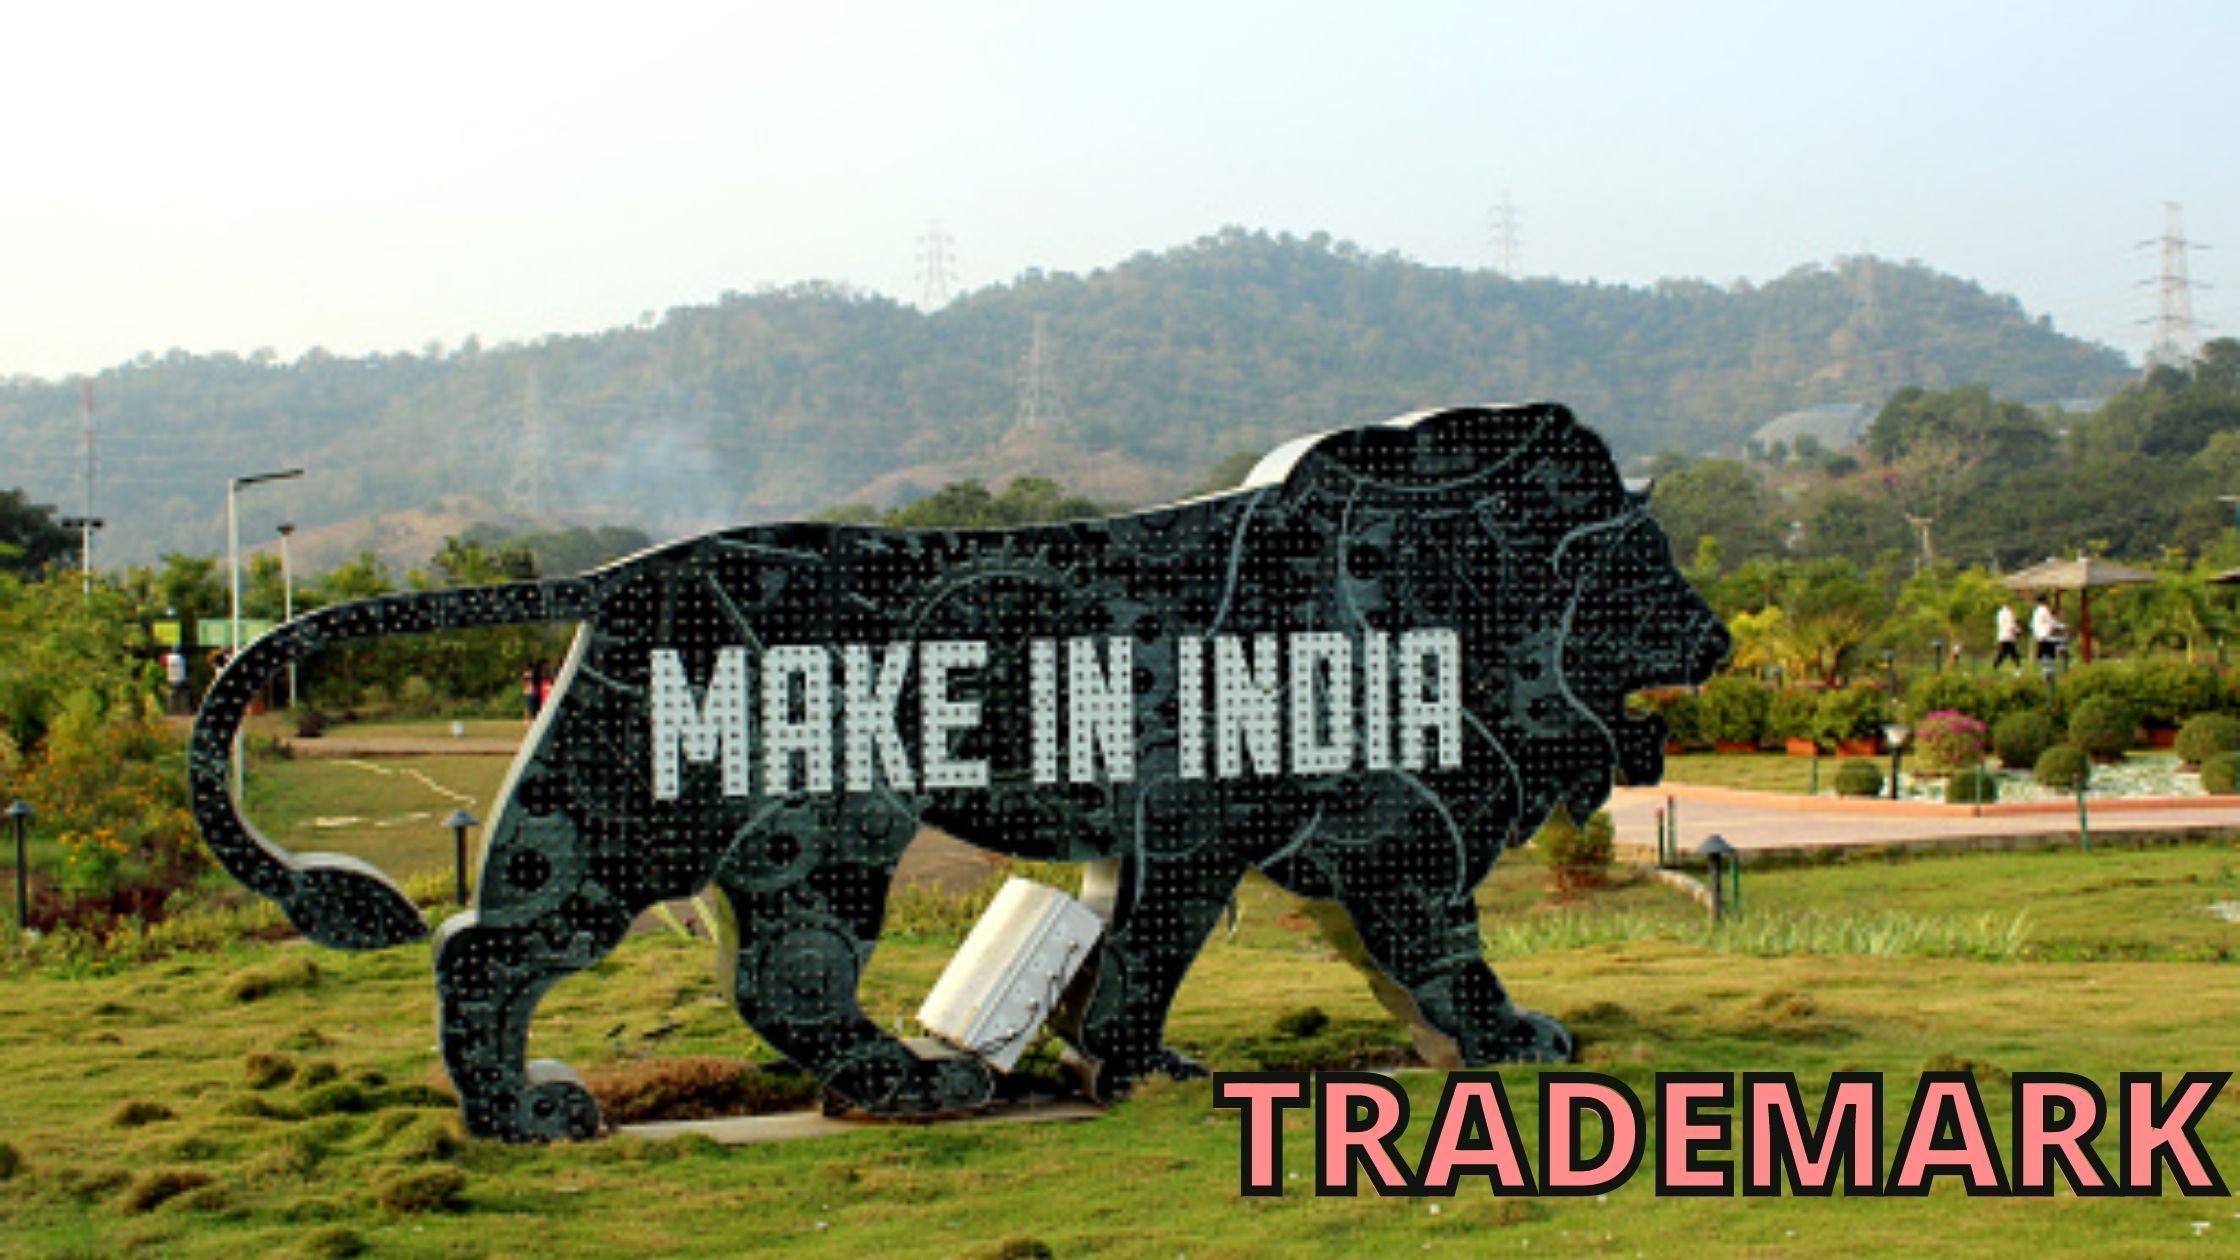 All about ‘Make in India’ Trade Mark